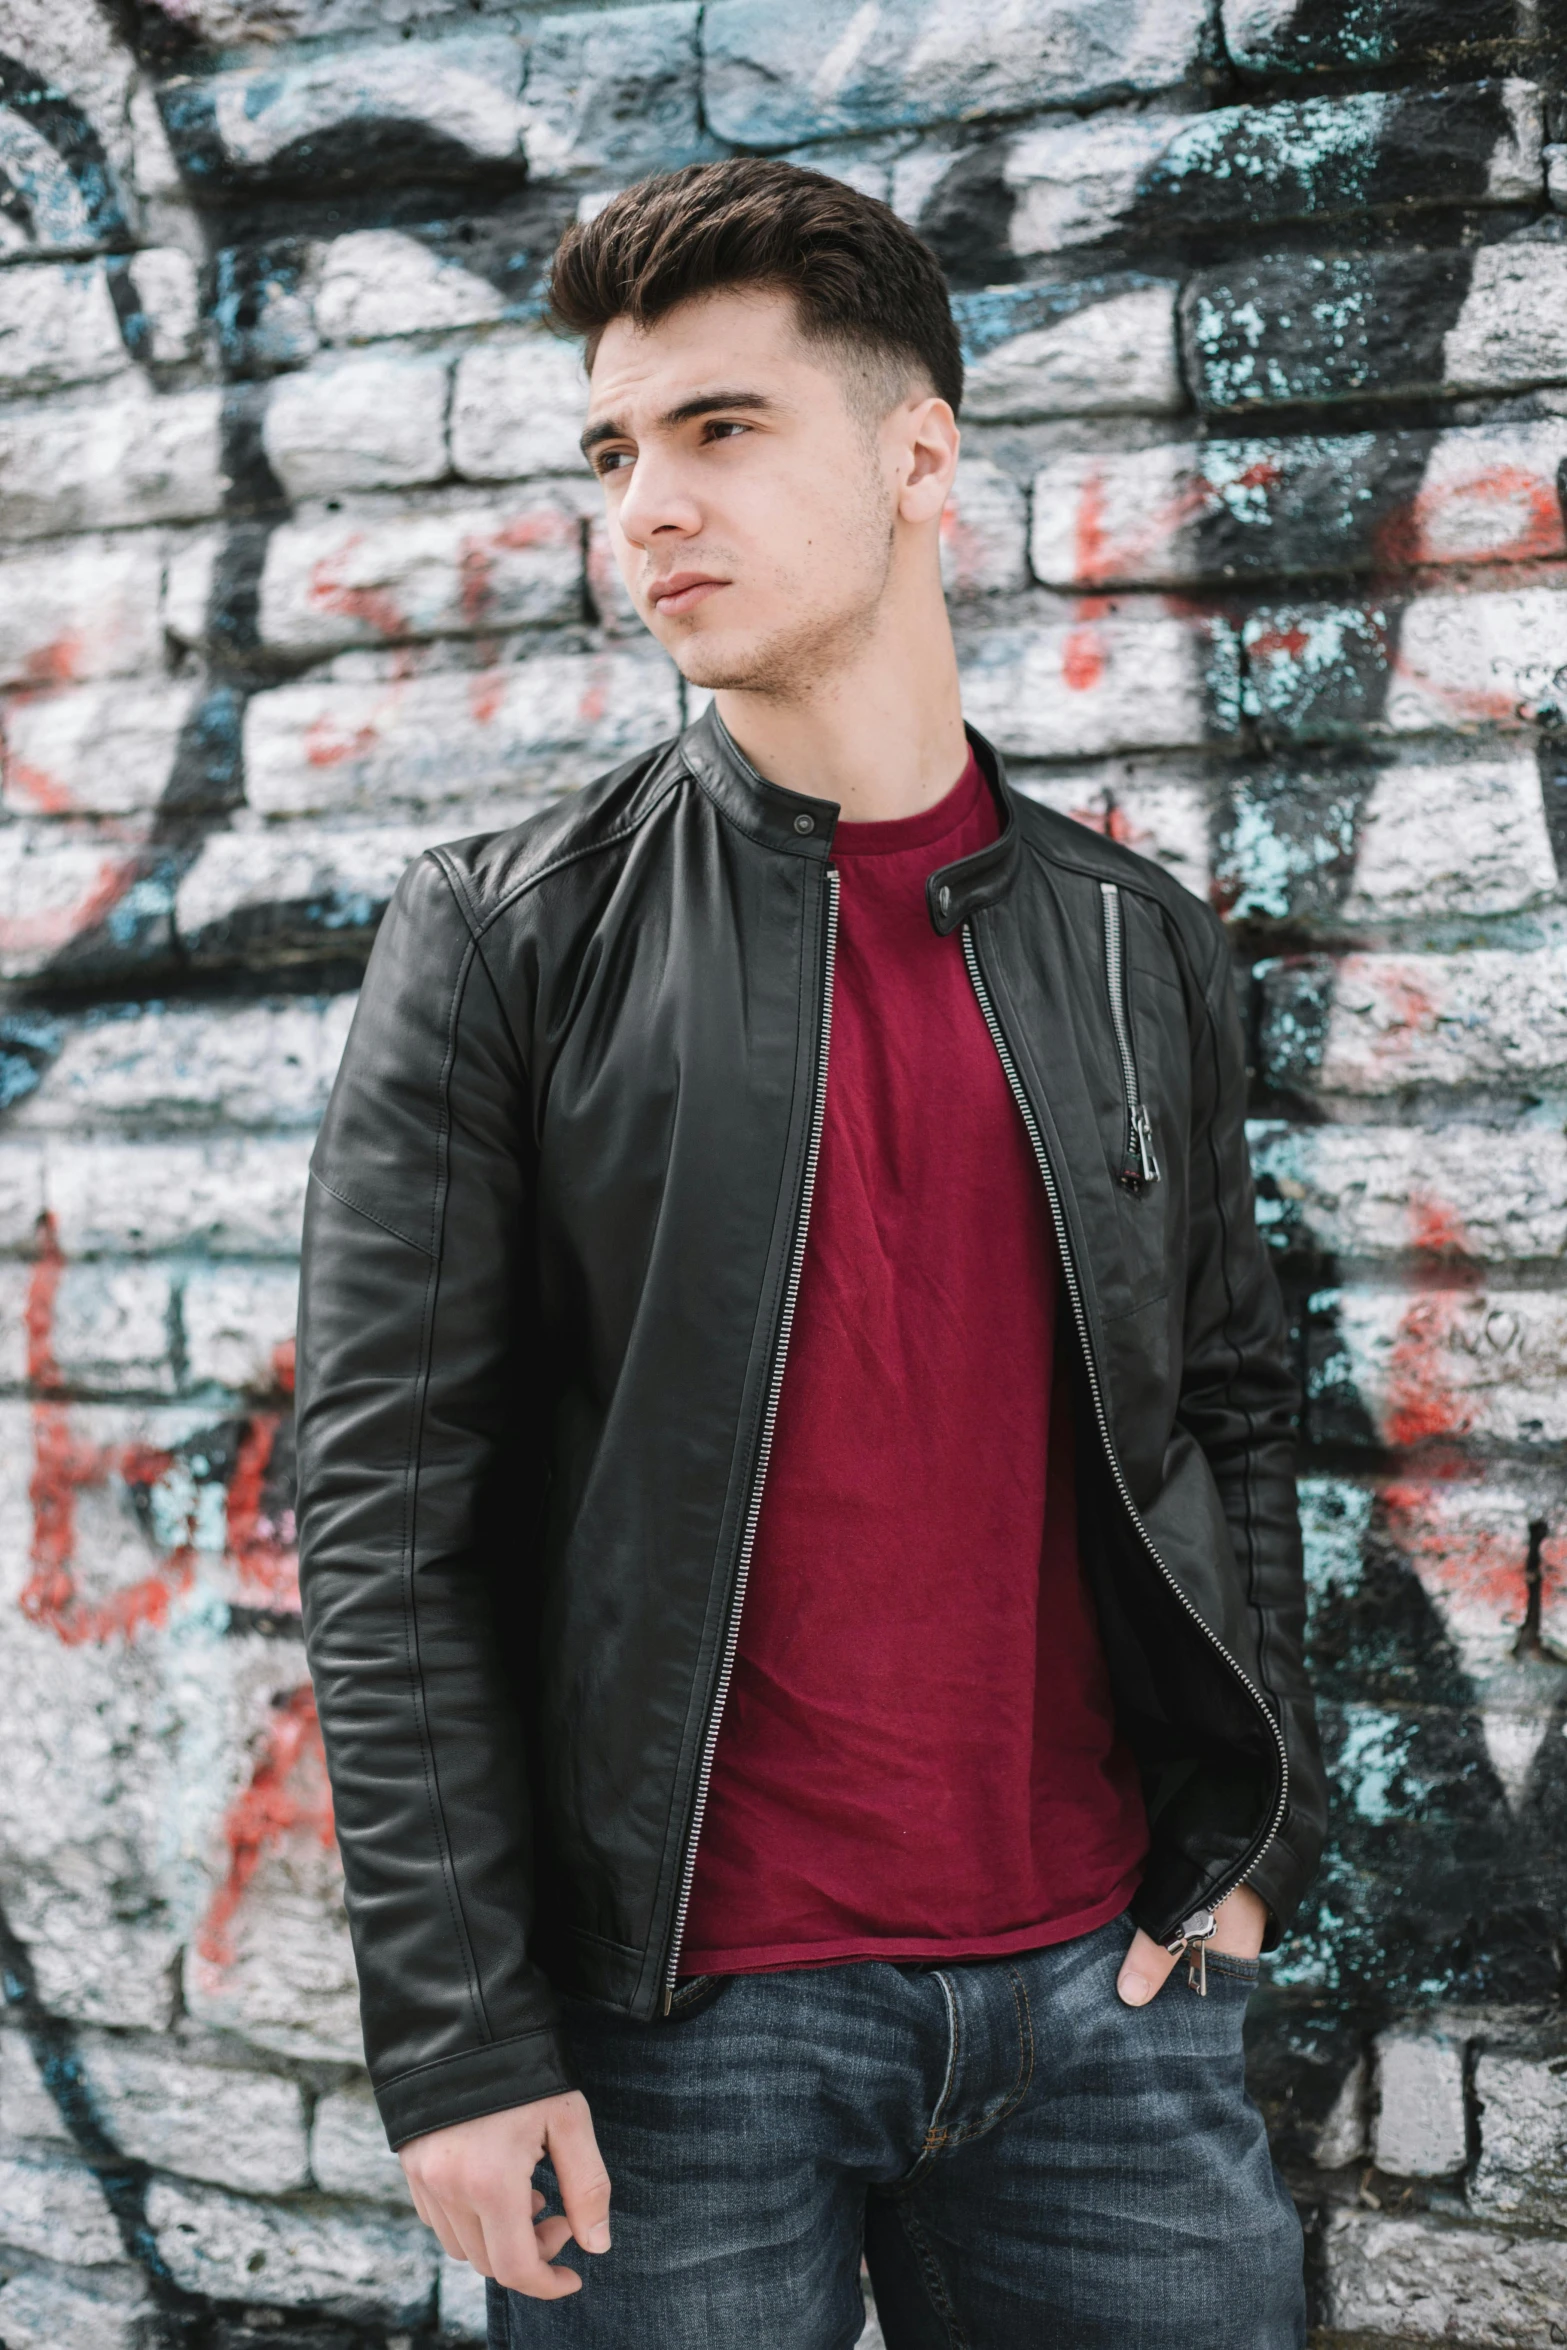 a young man in a red shirt and black leather jacket standing by a brick wall